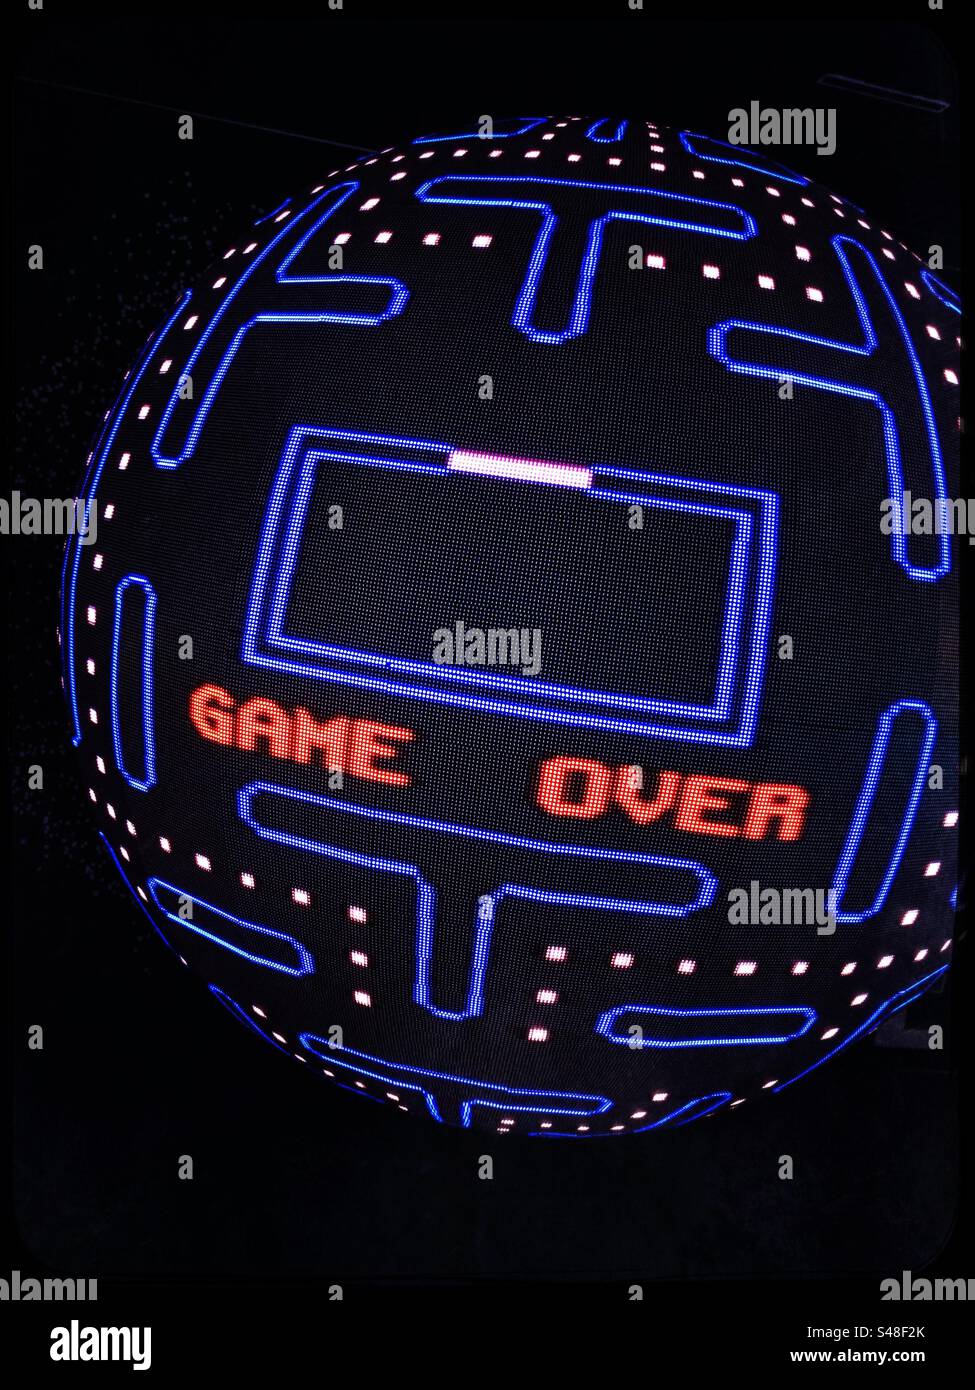 Spherical computer game showing game over Stock Photo